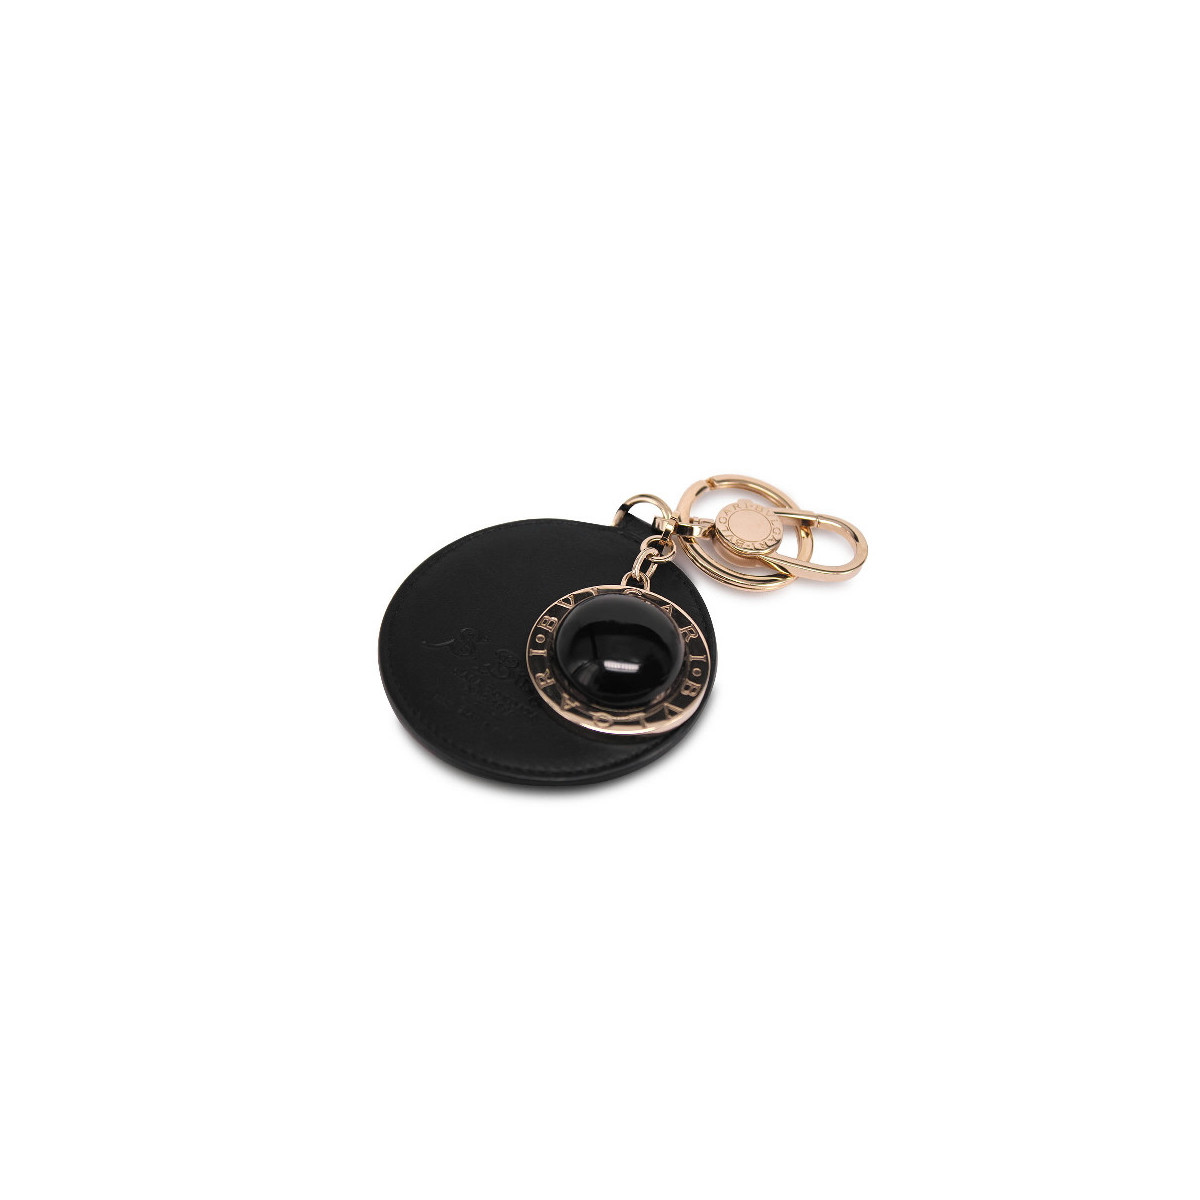 BVLGARI KEY RING WITH STONE AND LEATHER 34440